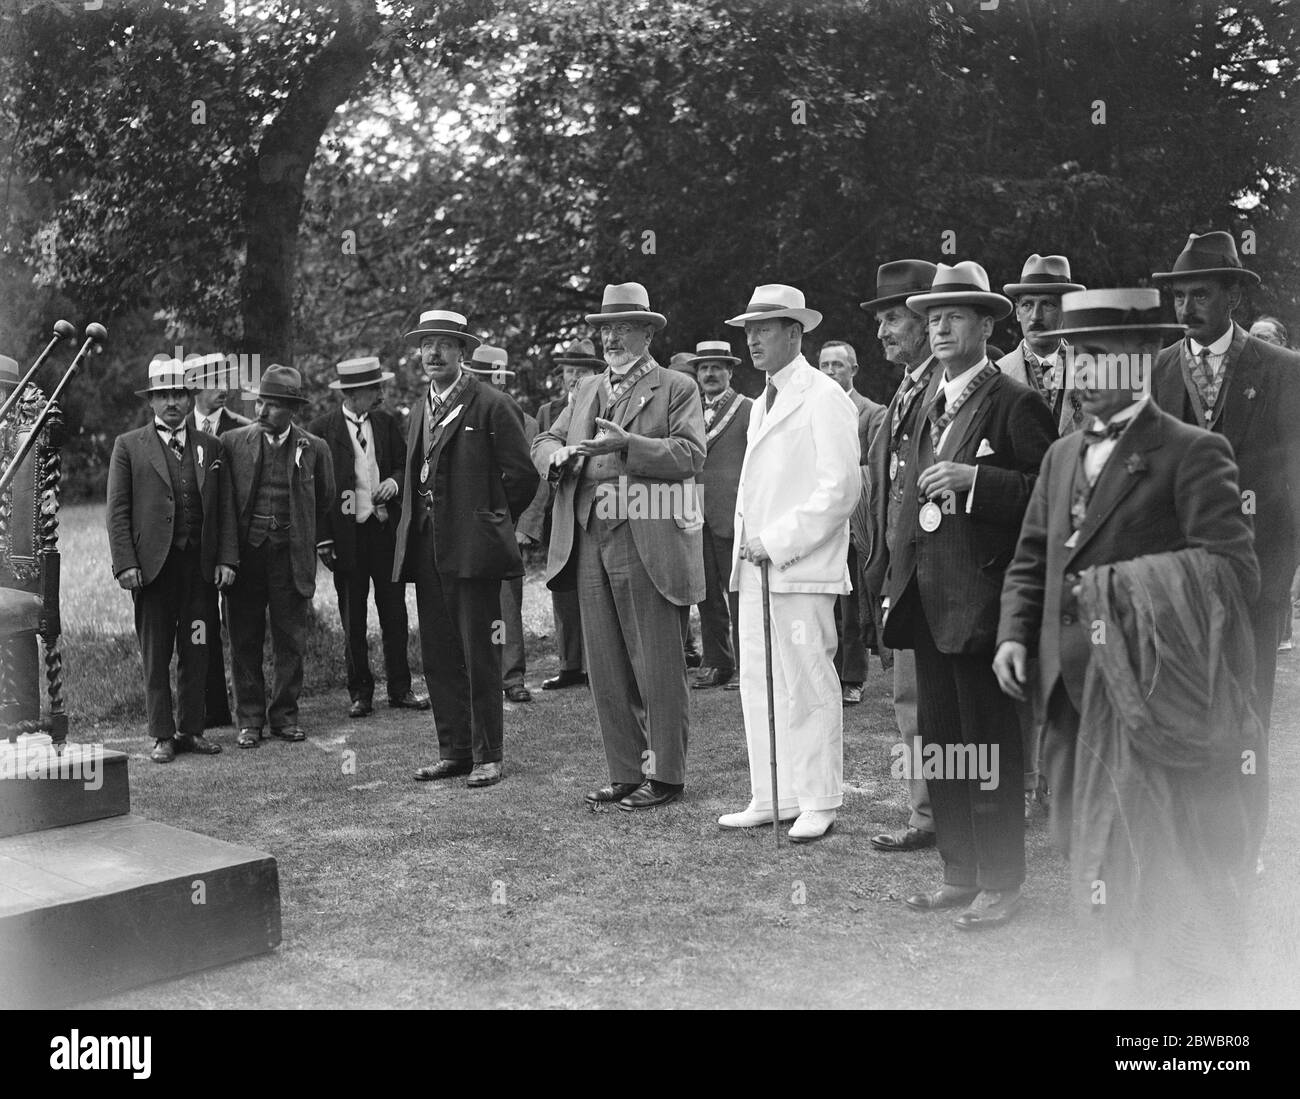 Quaint ' Druids ceremony at Blenheim Park The Duke of Marlborough talking to some of the members of the Order 6 August 1923 Stock Photo